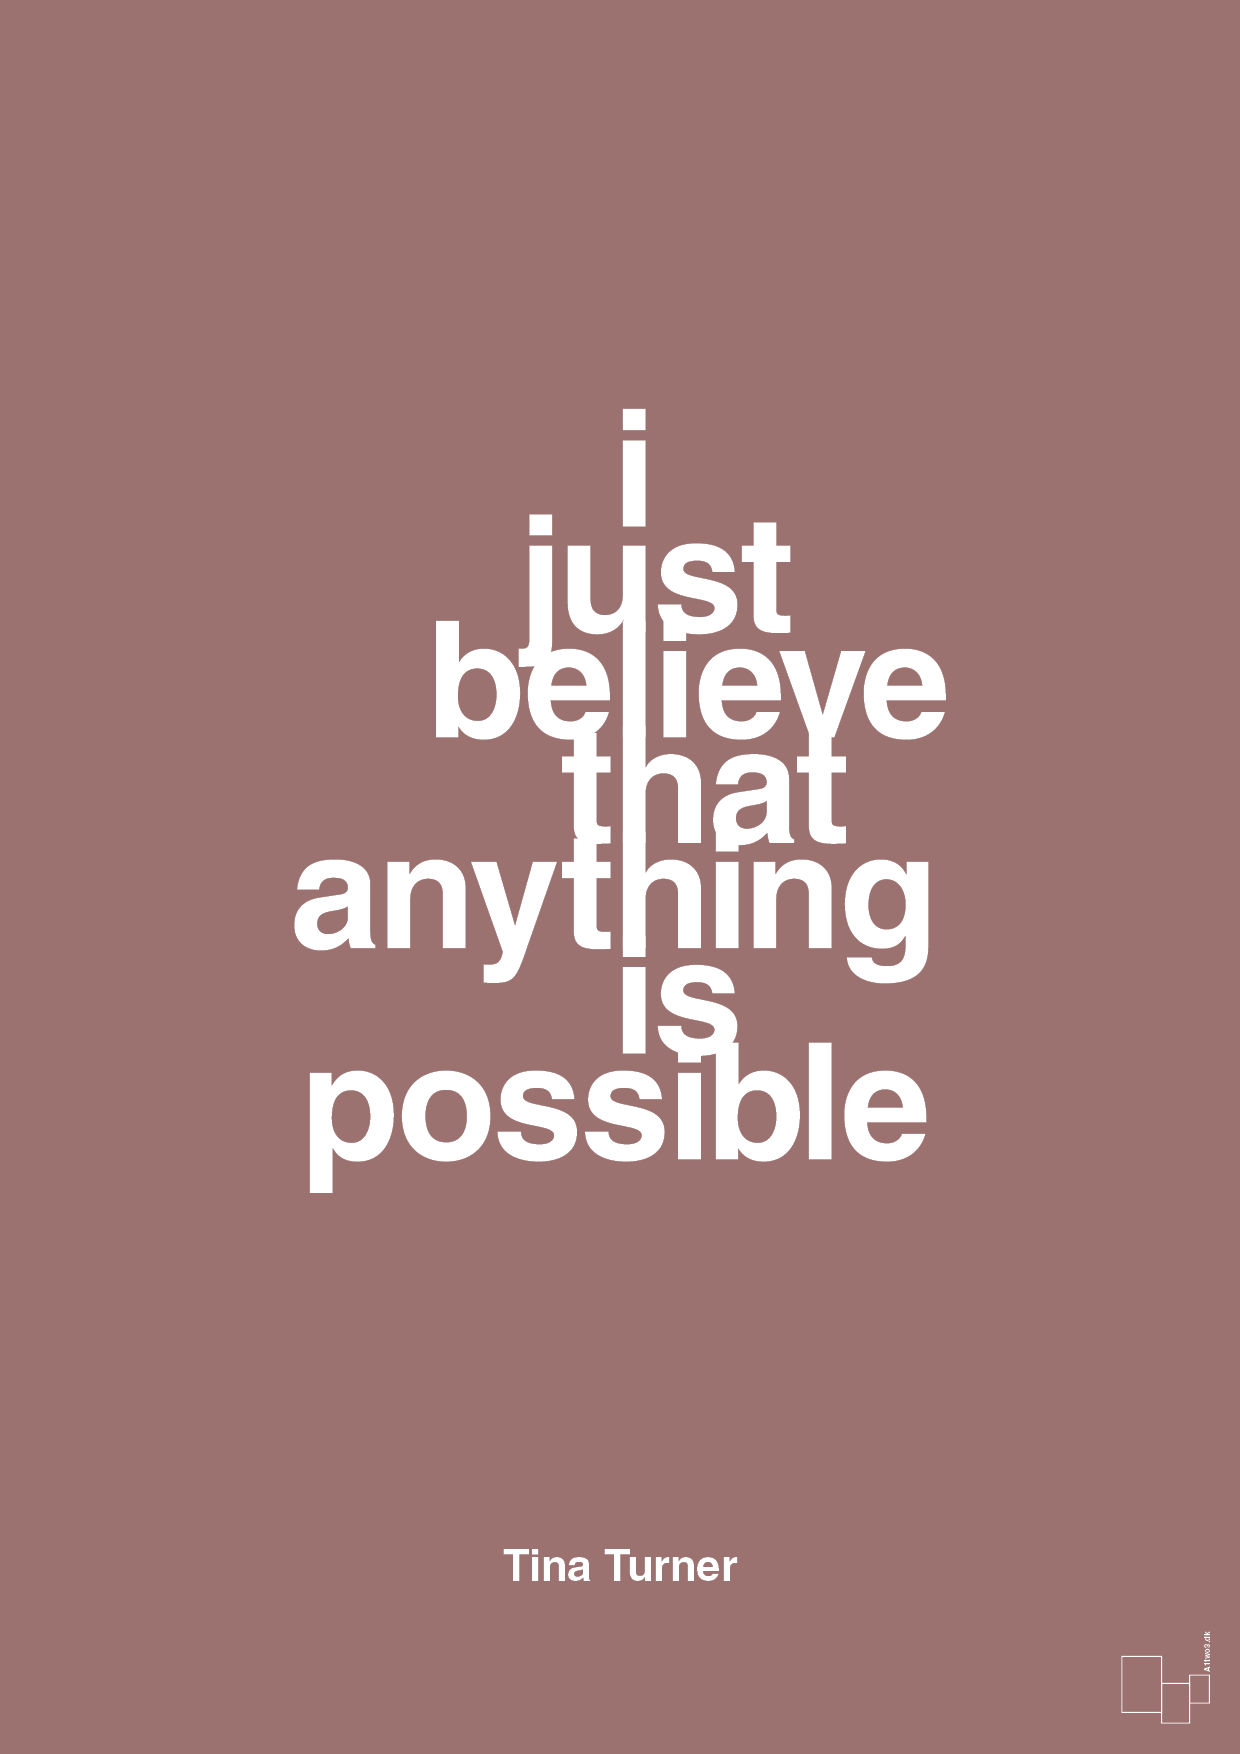 i just believe that anything is possible - Plakat med Citater i Plum